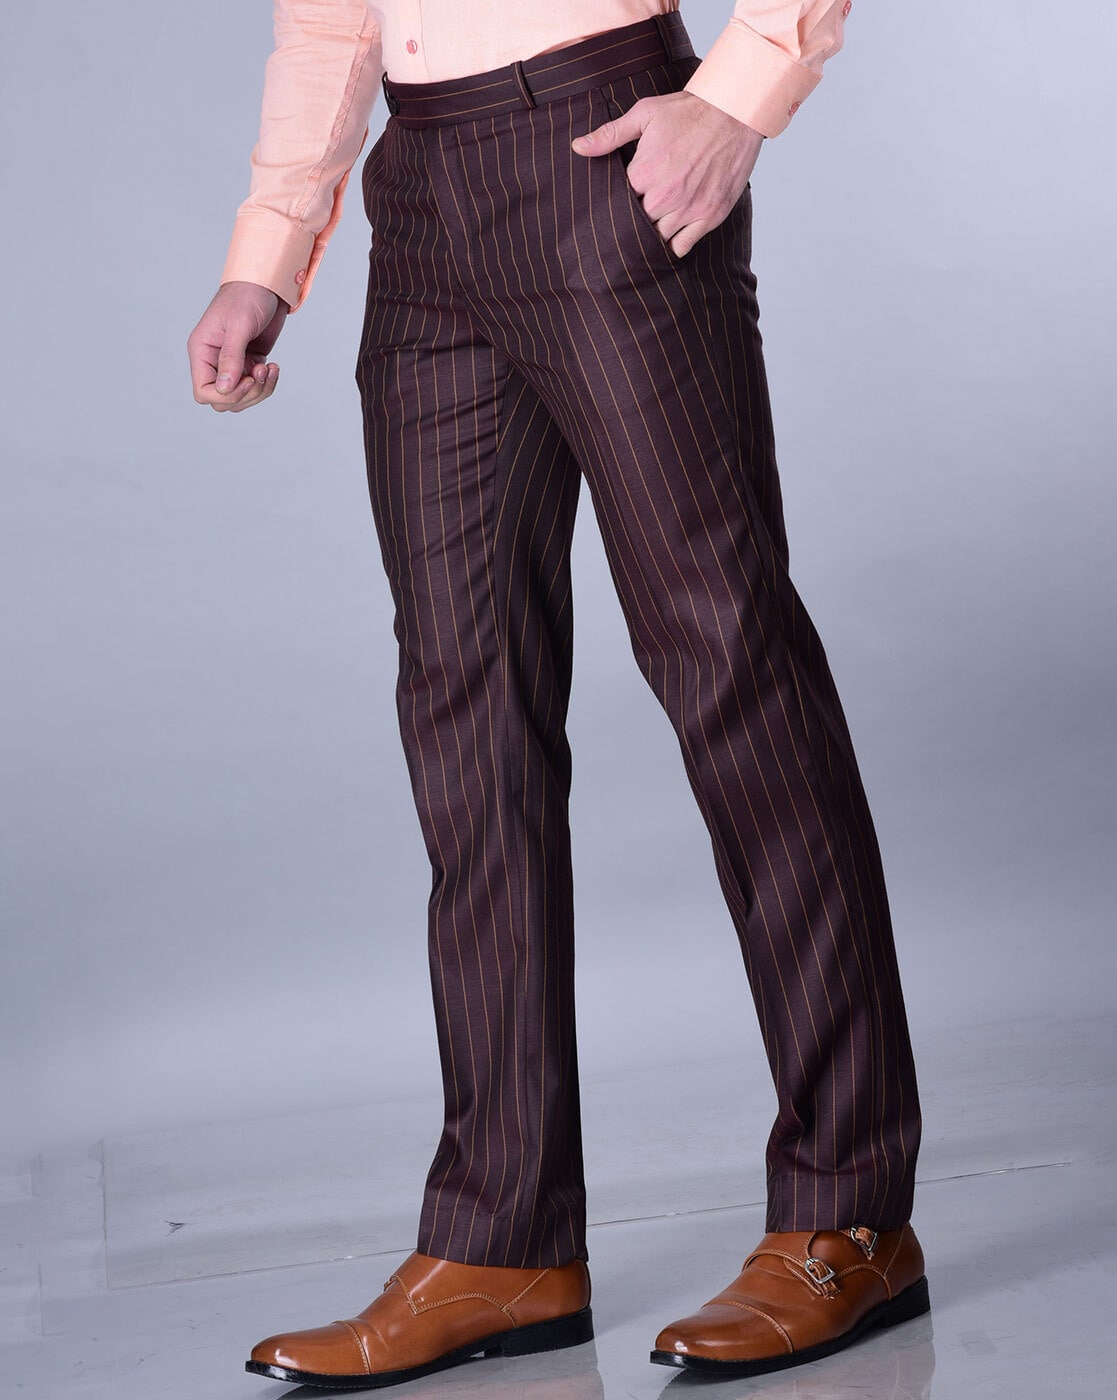 Buy Brown Yellow Stripe Men Pant Cotton Handloom for Best Price, Reviews,  Free Shipping